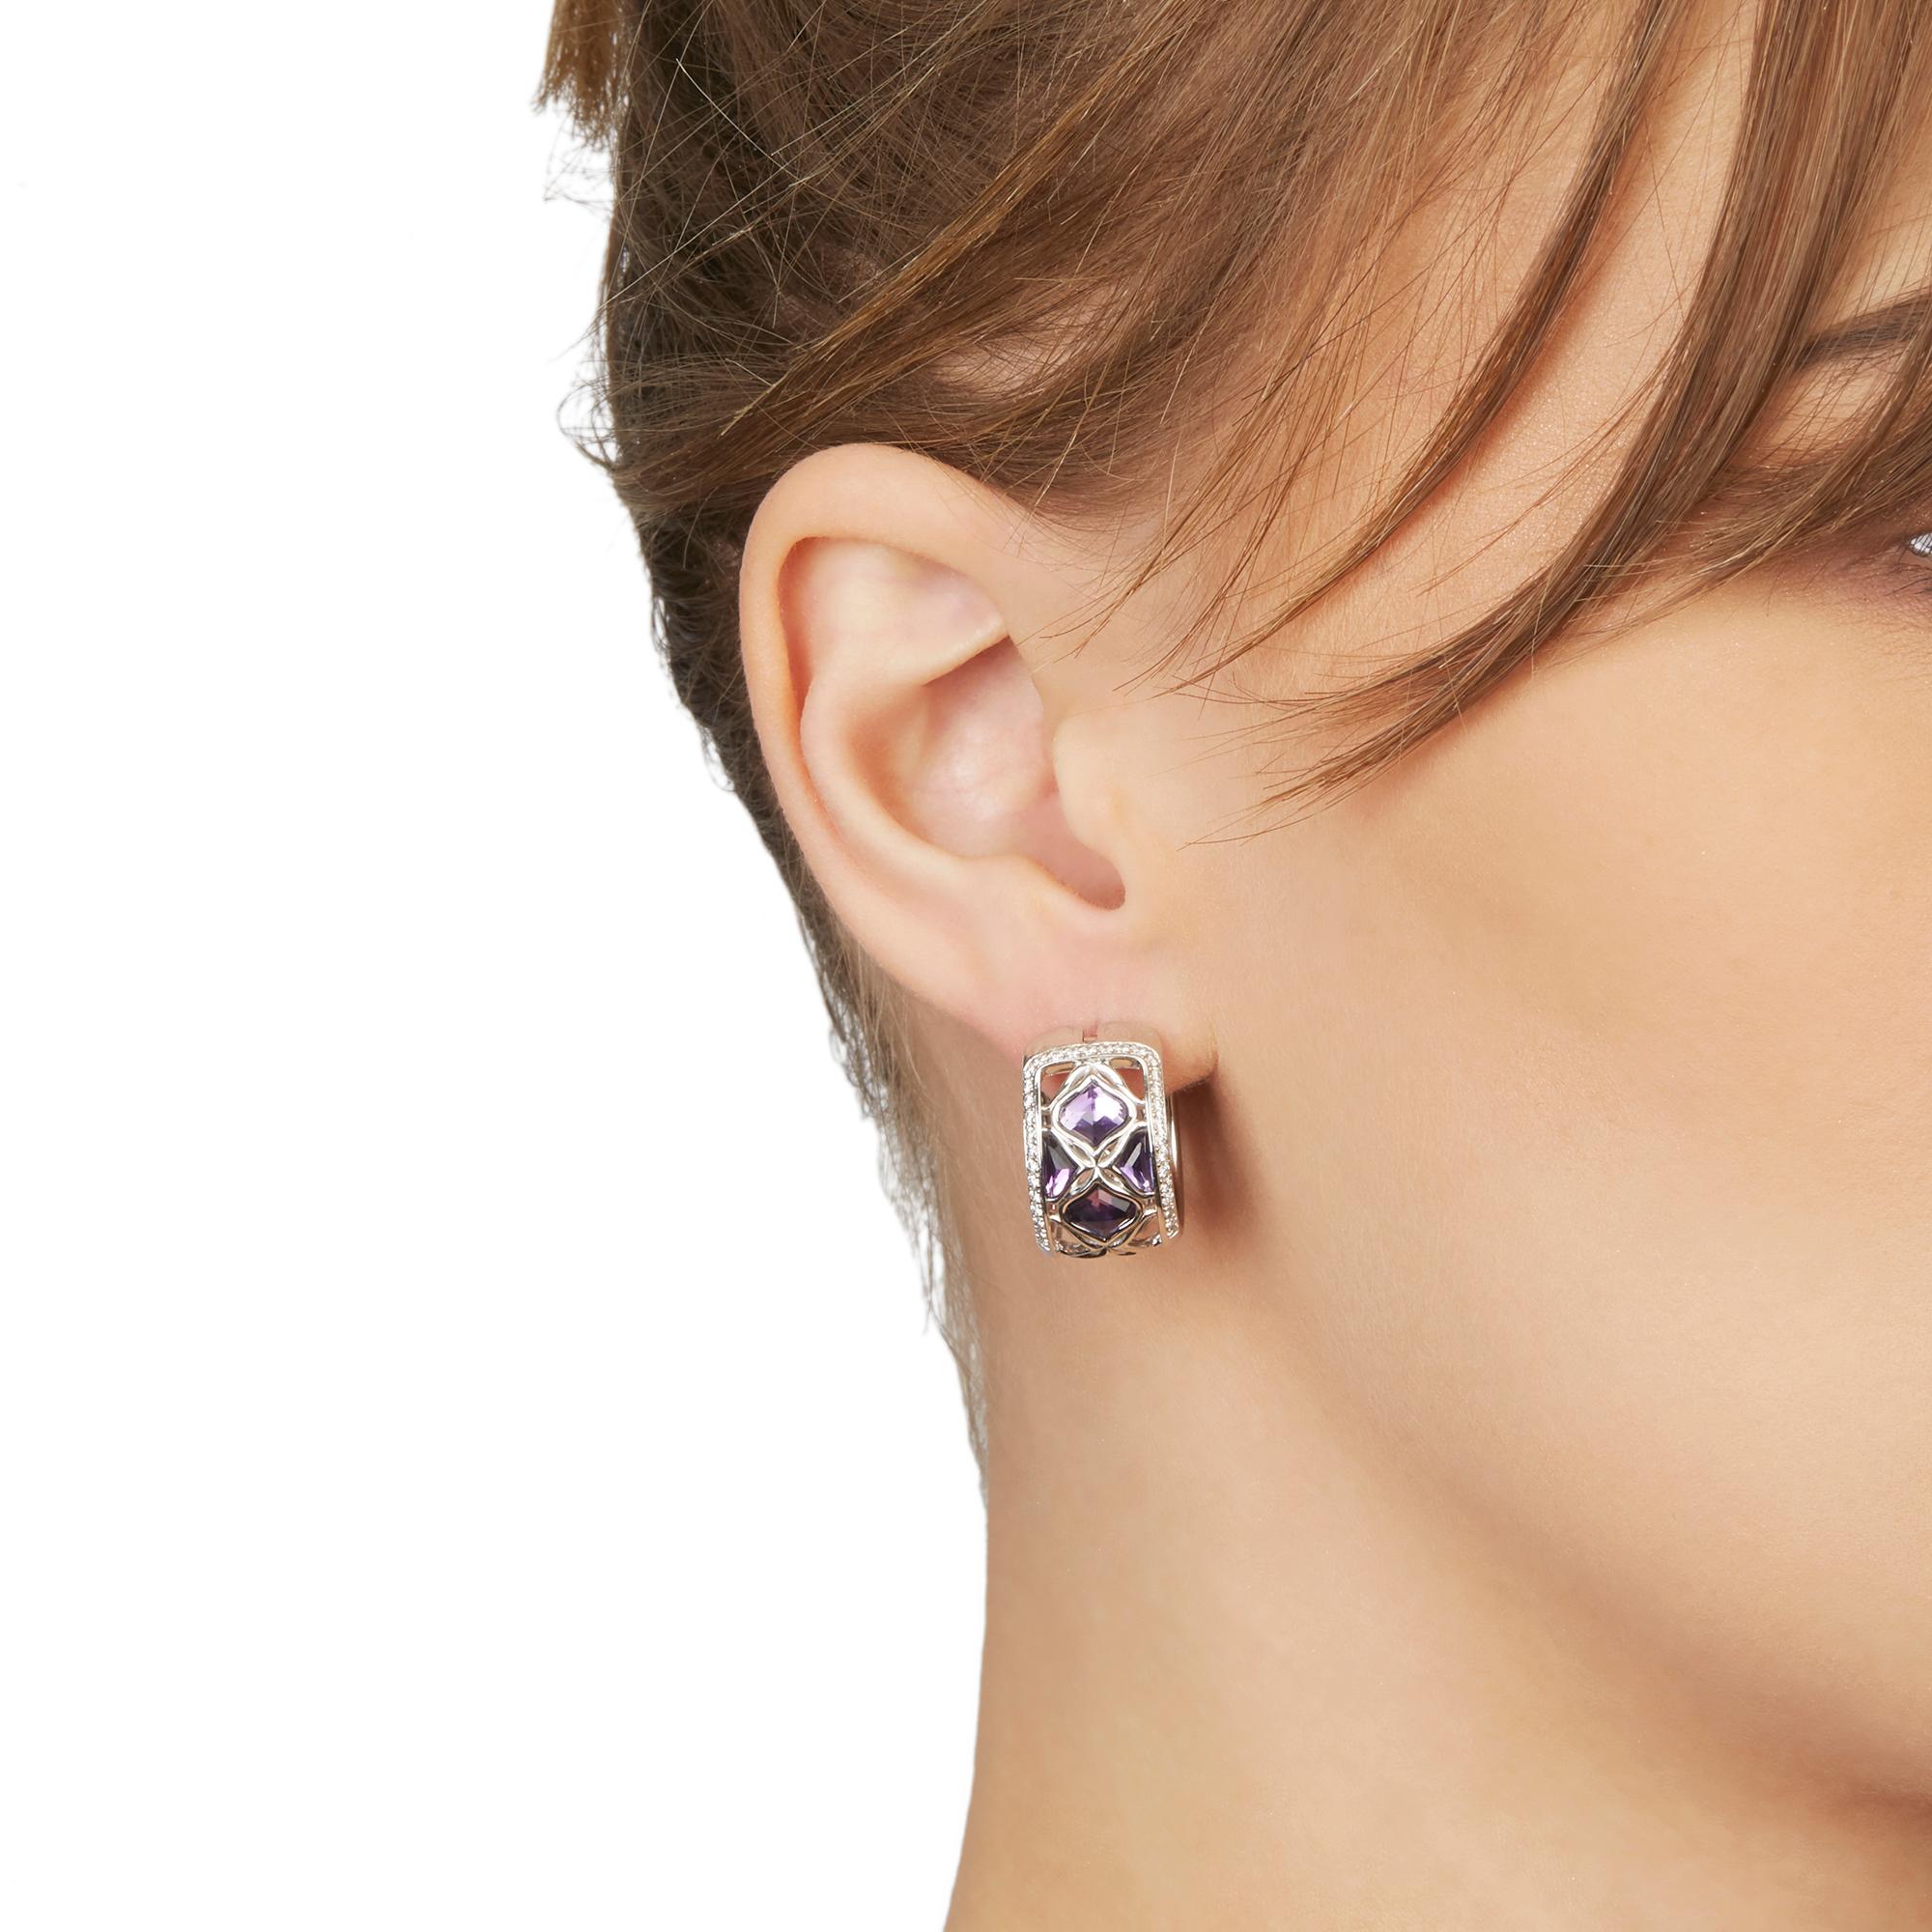 These Earrings by Chopard are from their Imperiale collection and feature 8 Amethysts and 66 round brilliant cut Diamonds of 0.45ct total colour G, clarity VS, made in 18k White Gold. These Earrings have secure latch backs. Complete with Xupes